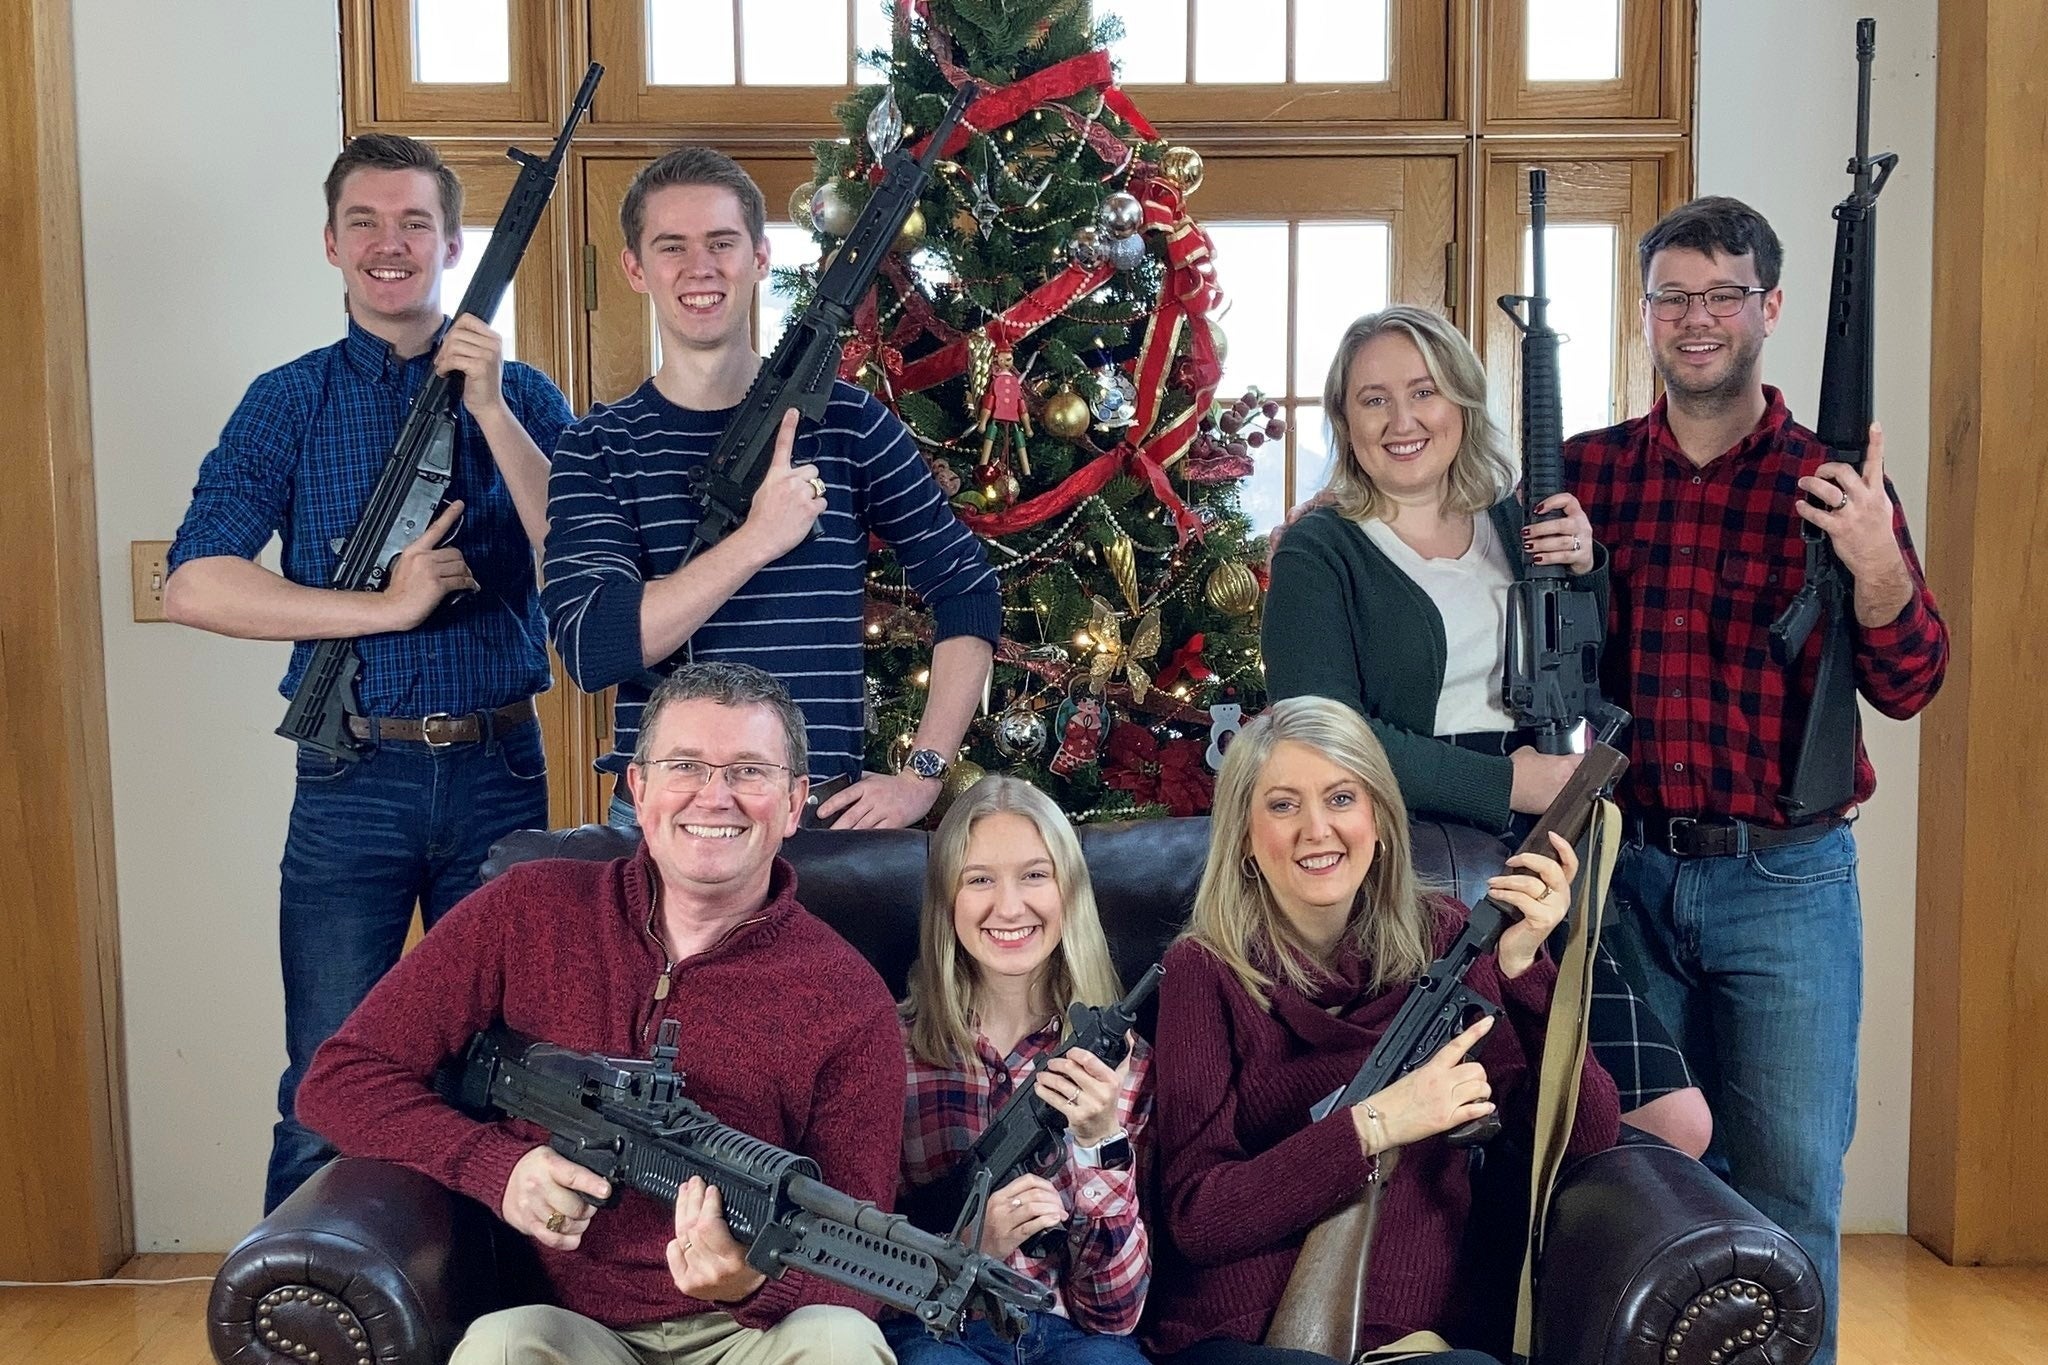 Rep. Thomas Massie (R-KY) is seen in a Christmas photo of his family holding guns in this image obtained from Twitter that was posted on December 4, 2021. 